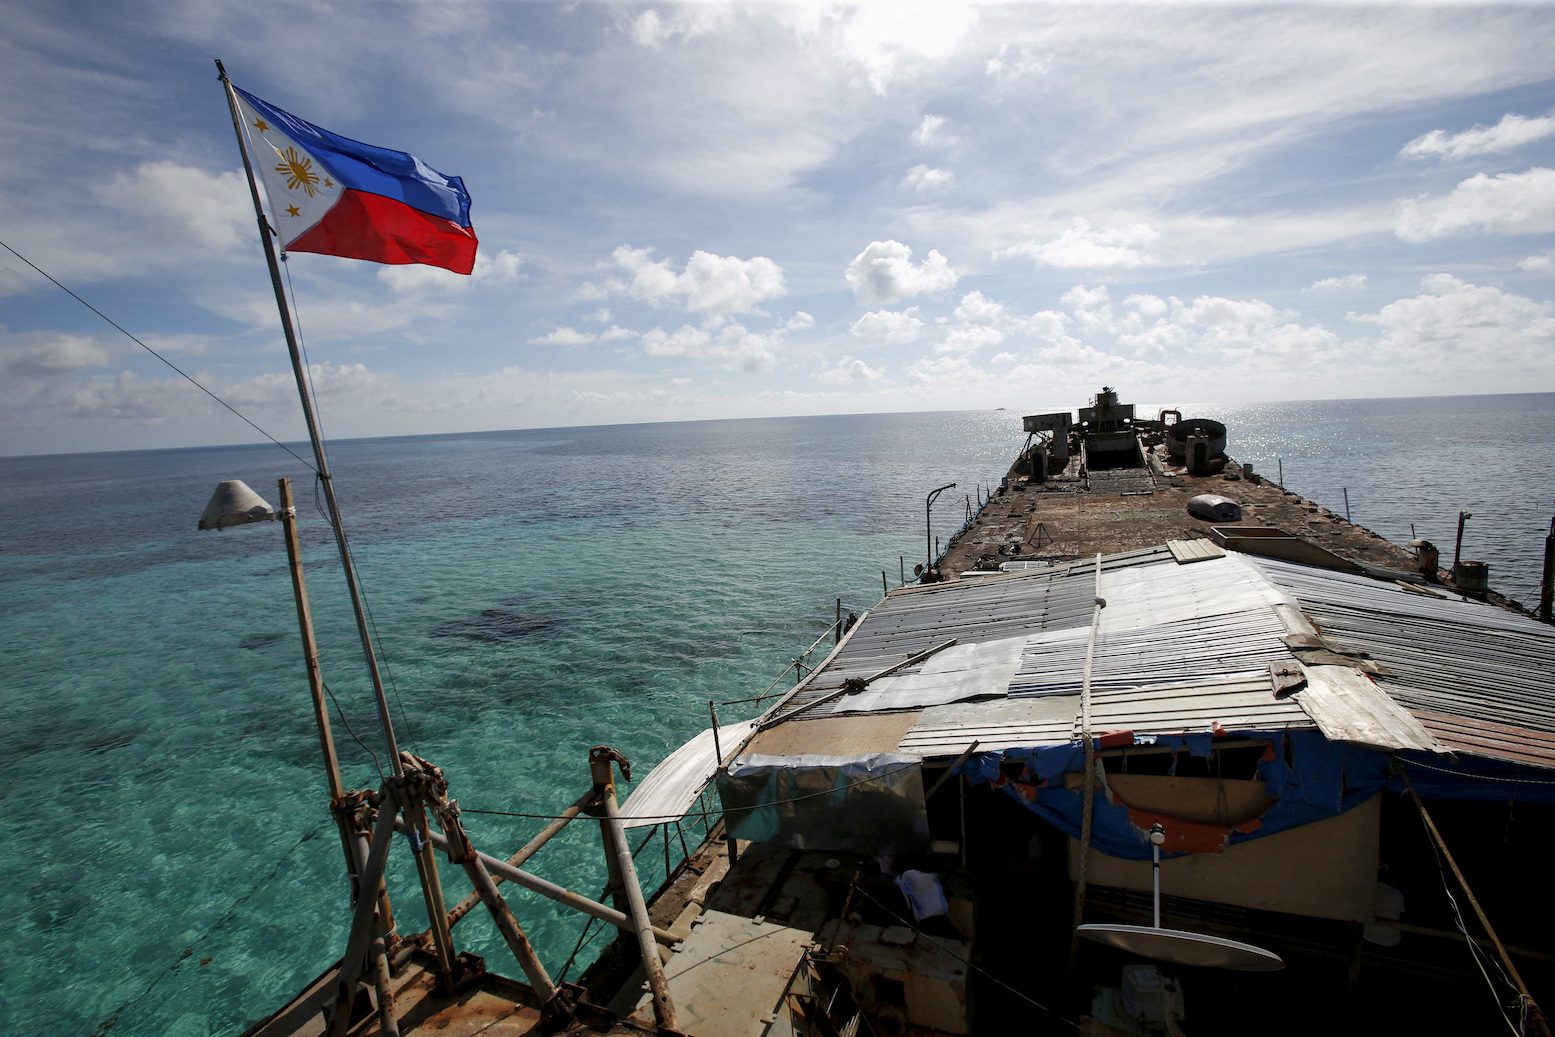 AFP: Soldier severely injured after China’s ‘intentional ramming’ in Ayungin Shoal